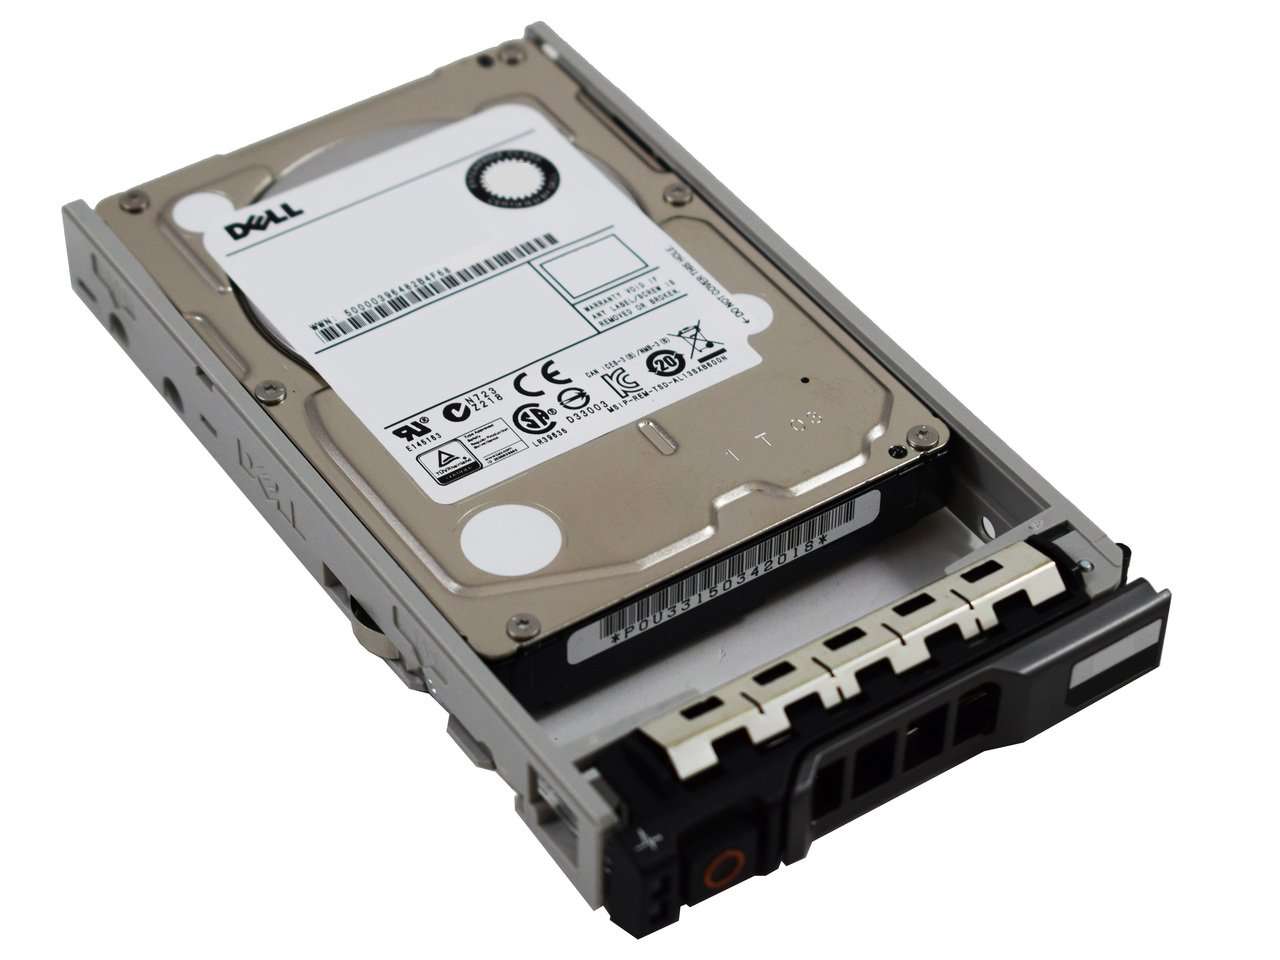 Dell G13 400-25627 600GB 10K RPM SAS 6Gb/s 512n 2.5" Manufacturer Recertified HDD